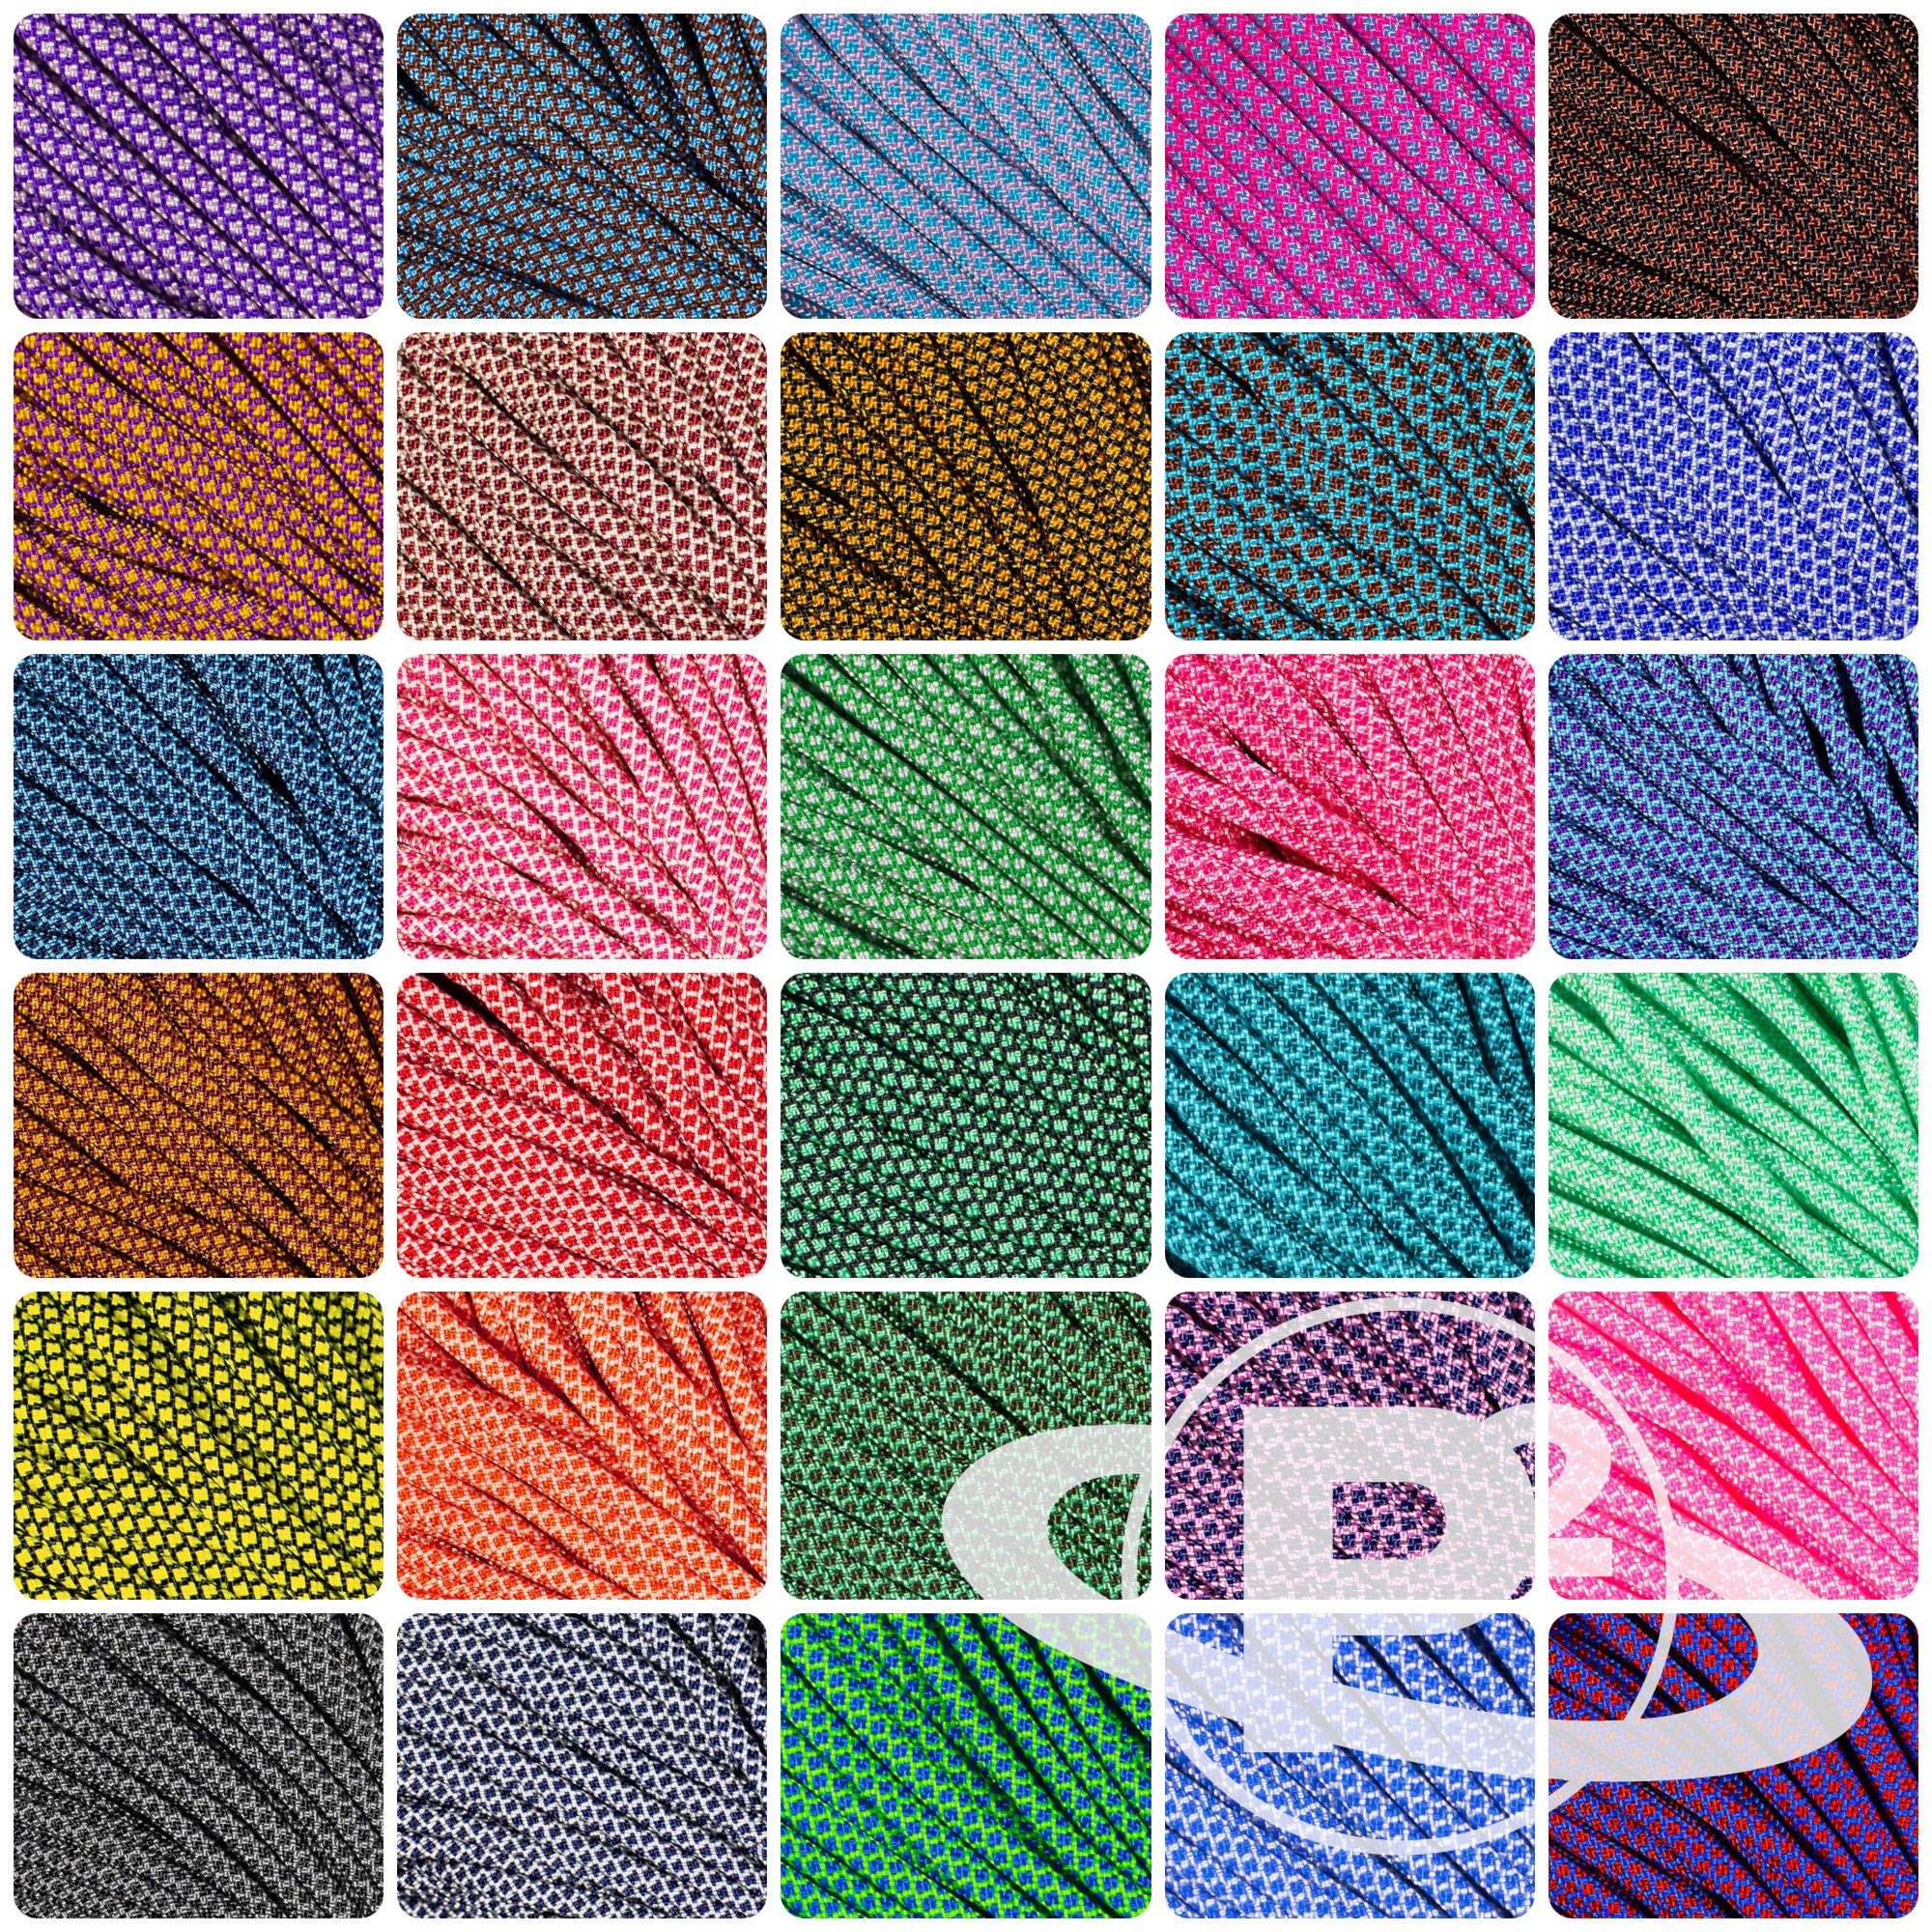 550 Diamond Paracord Various Lengths & Colors Arts and Crafts